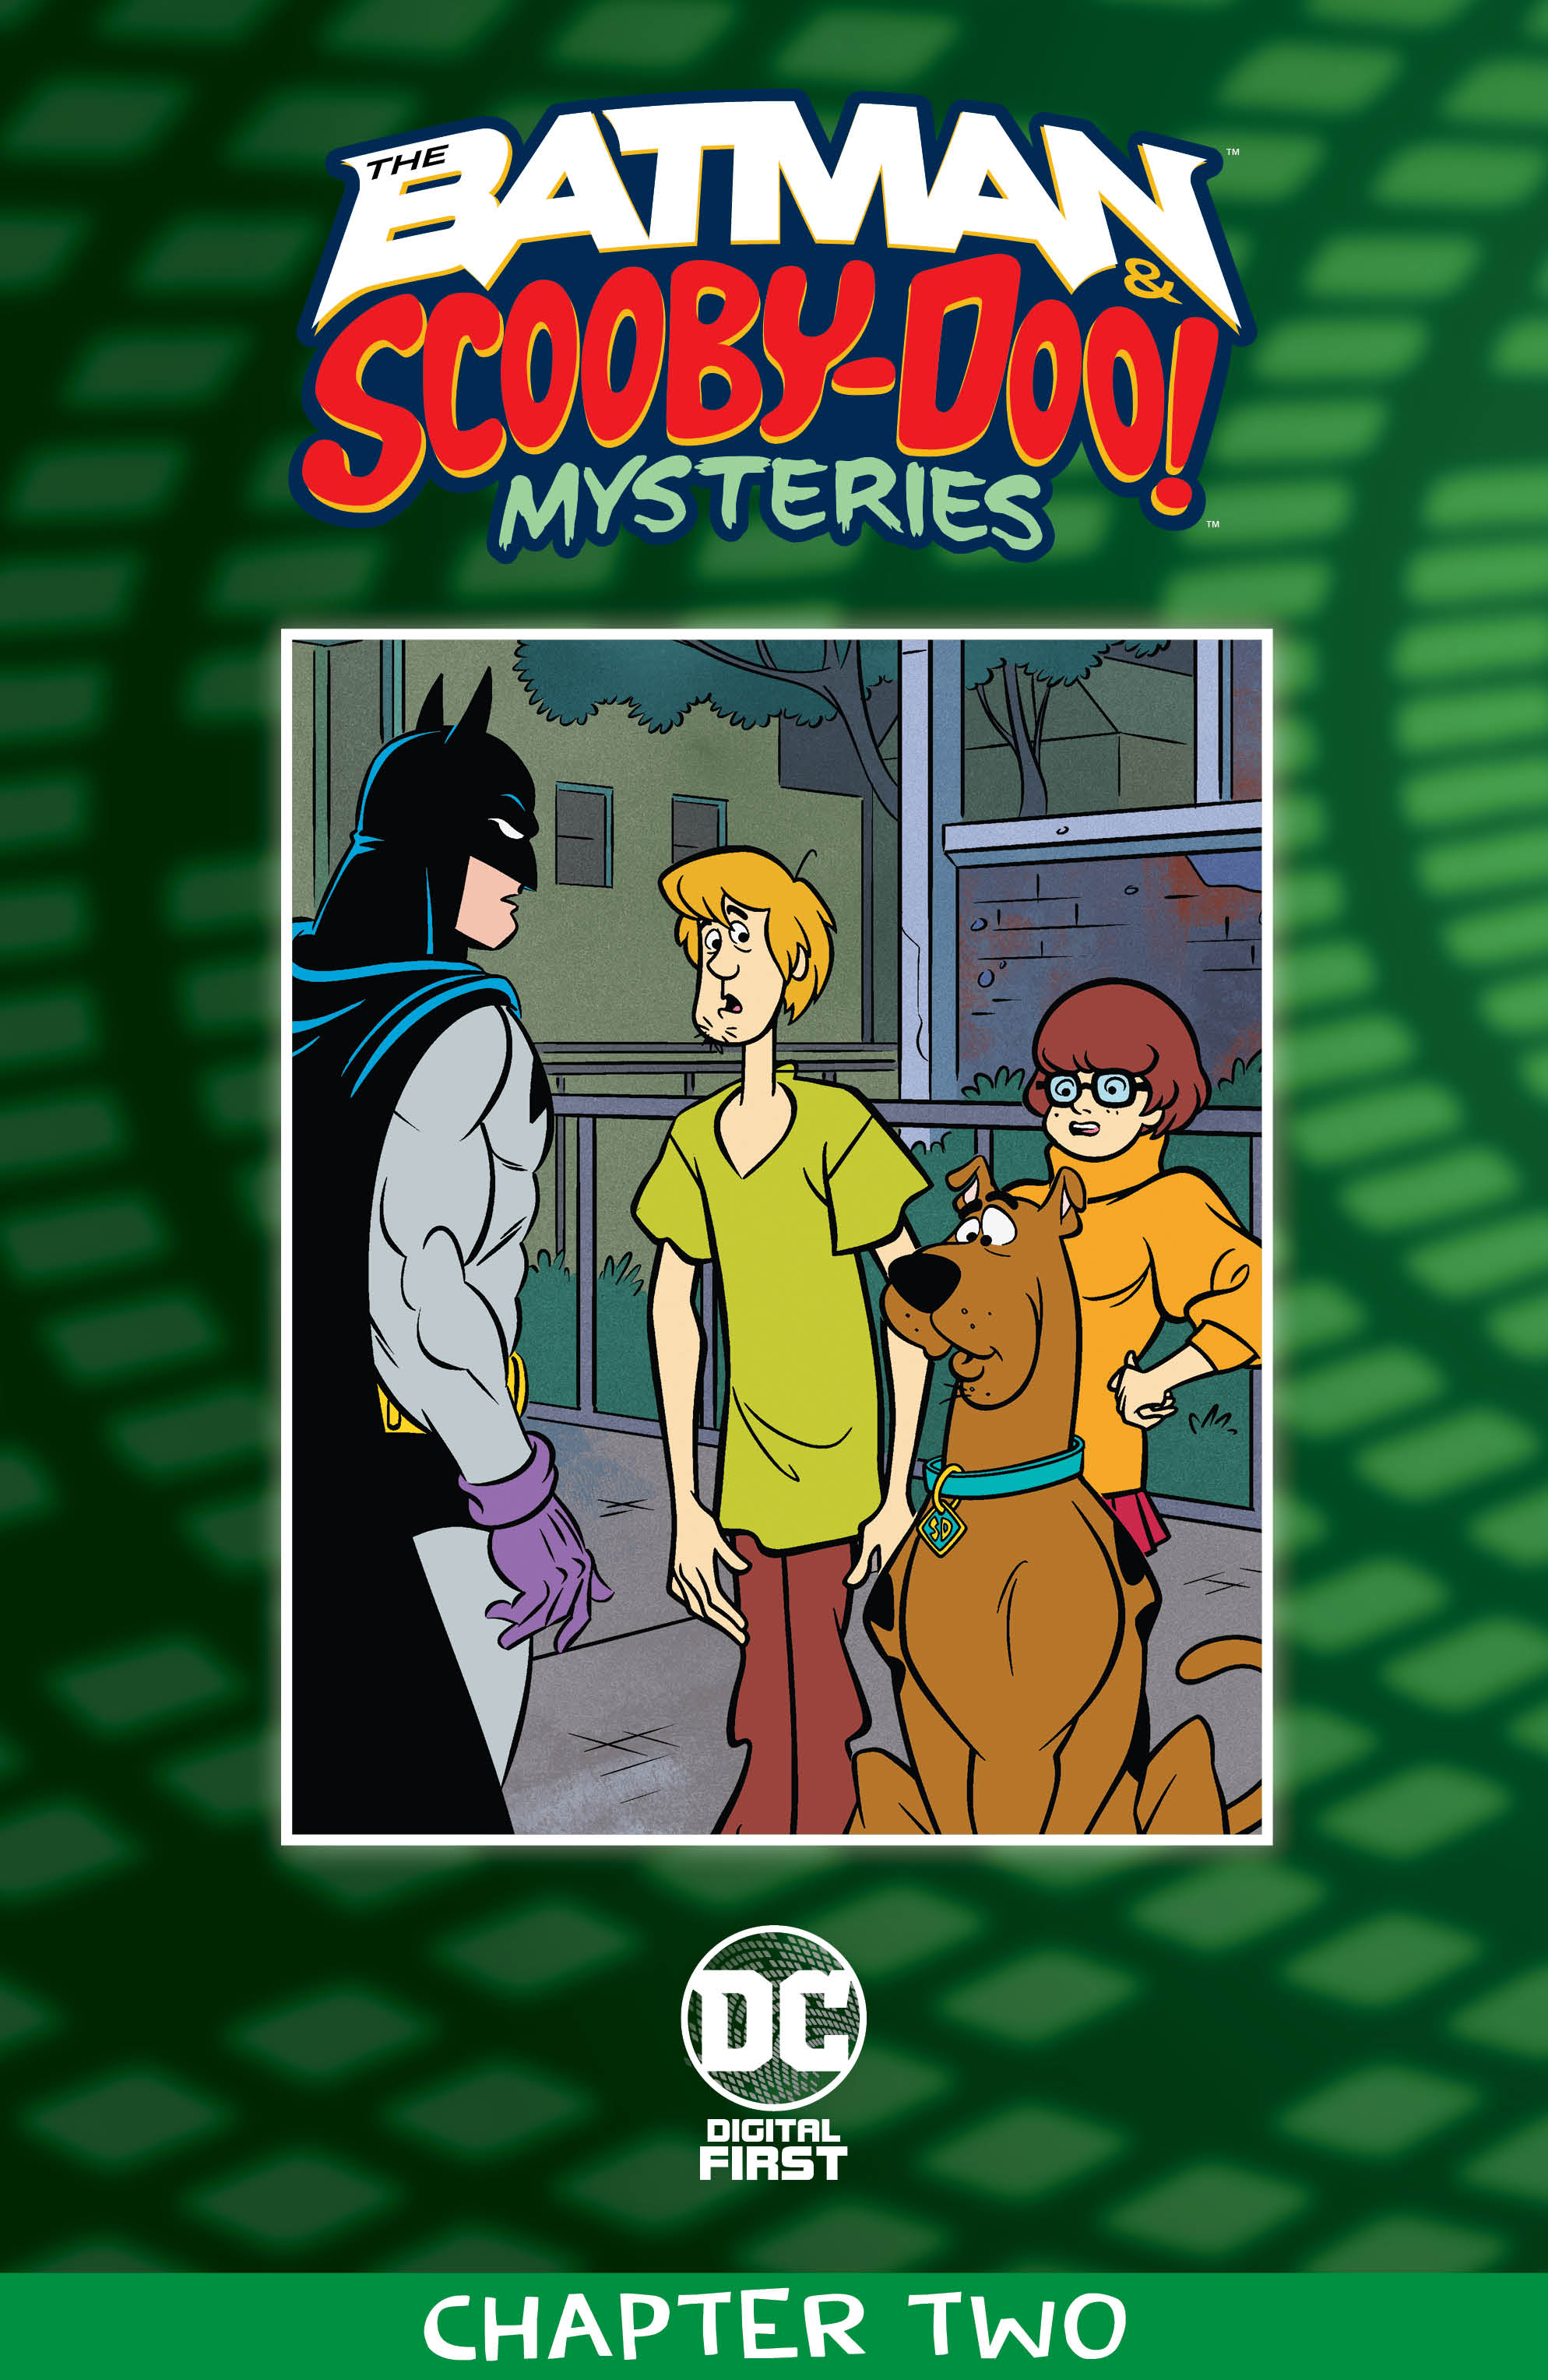 The Batman & Scooby-Doo Mysteries (2021-) (Digital First): Chapter 2 - Page 2